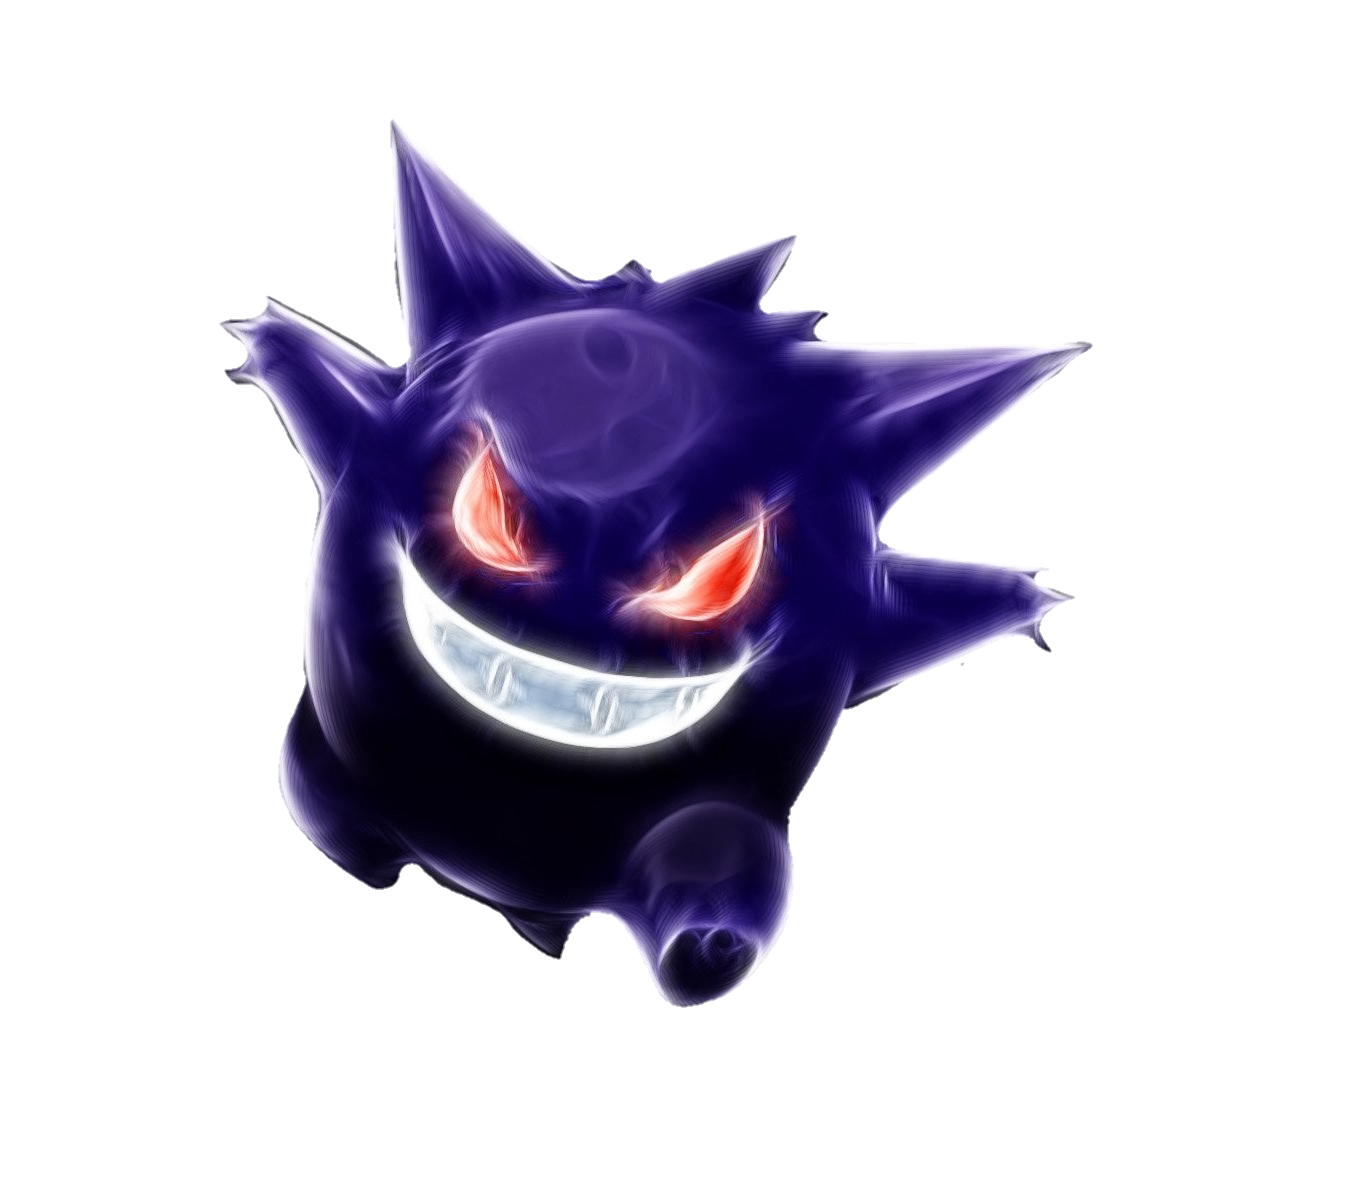 pokemon-png-from-pngfre-36